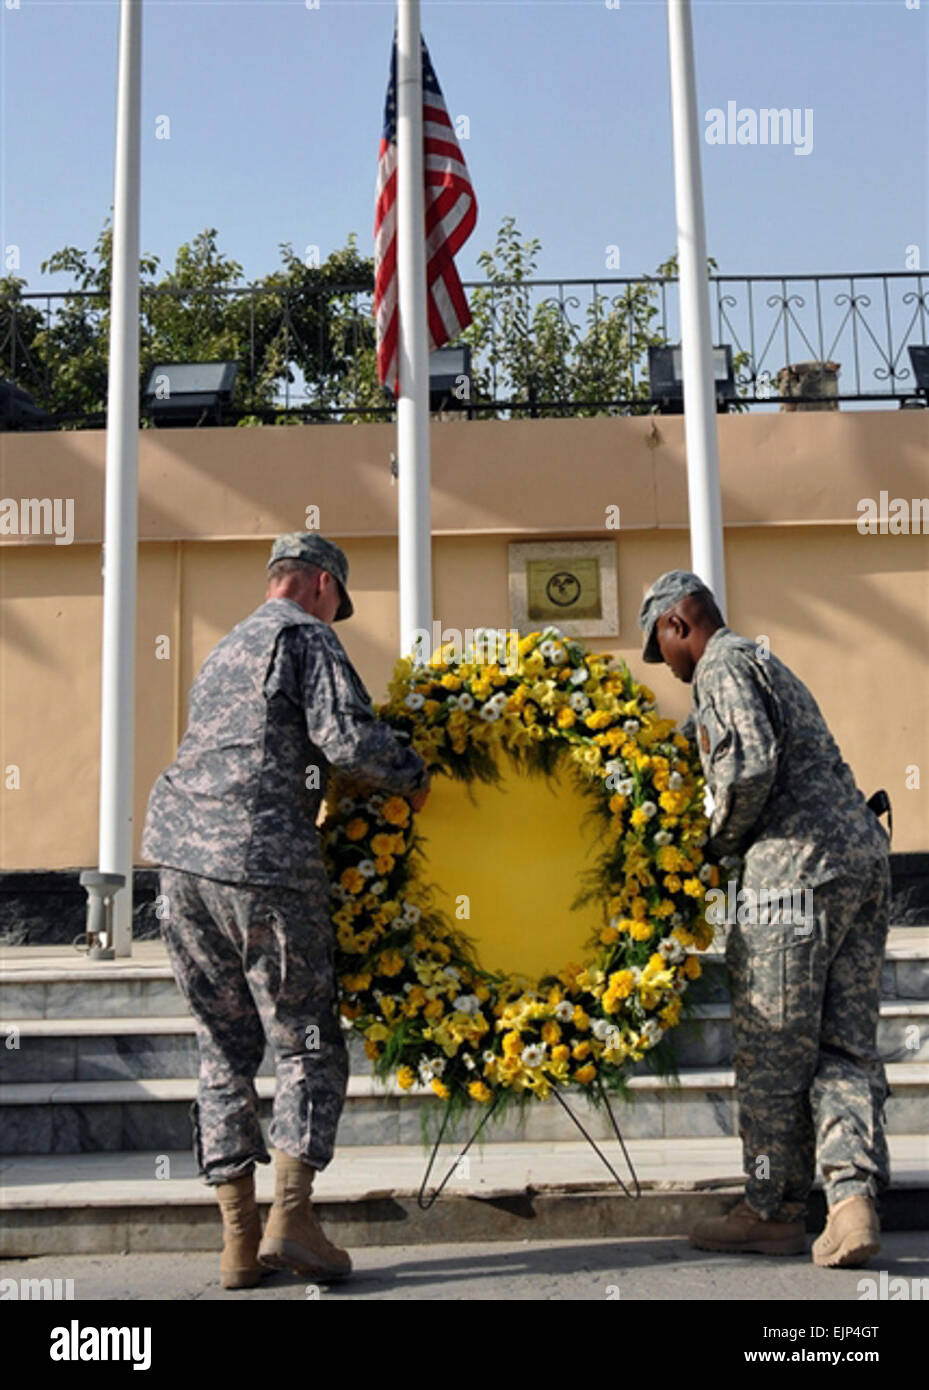 Army Maj. Gen. Robert Cone, commander of Combined Security Transition Command - Afghanistan, and Army Sgt. Maj. Gregory Valcin, acting CSTC-A command sergeant major, place a wreath below a flag flown at half-staff during a remembrance ceremony at Camp Eggers in Kabul, Afghanistan, Sept. 11, 2008 Stock Photo